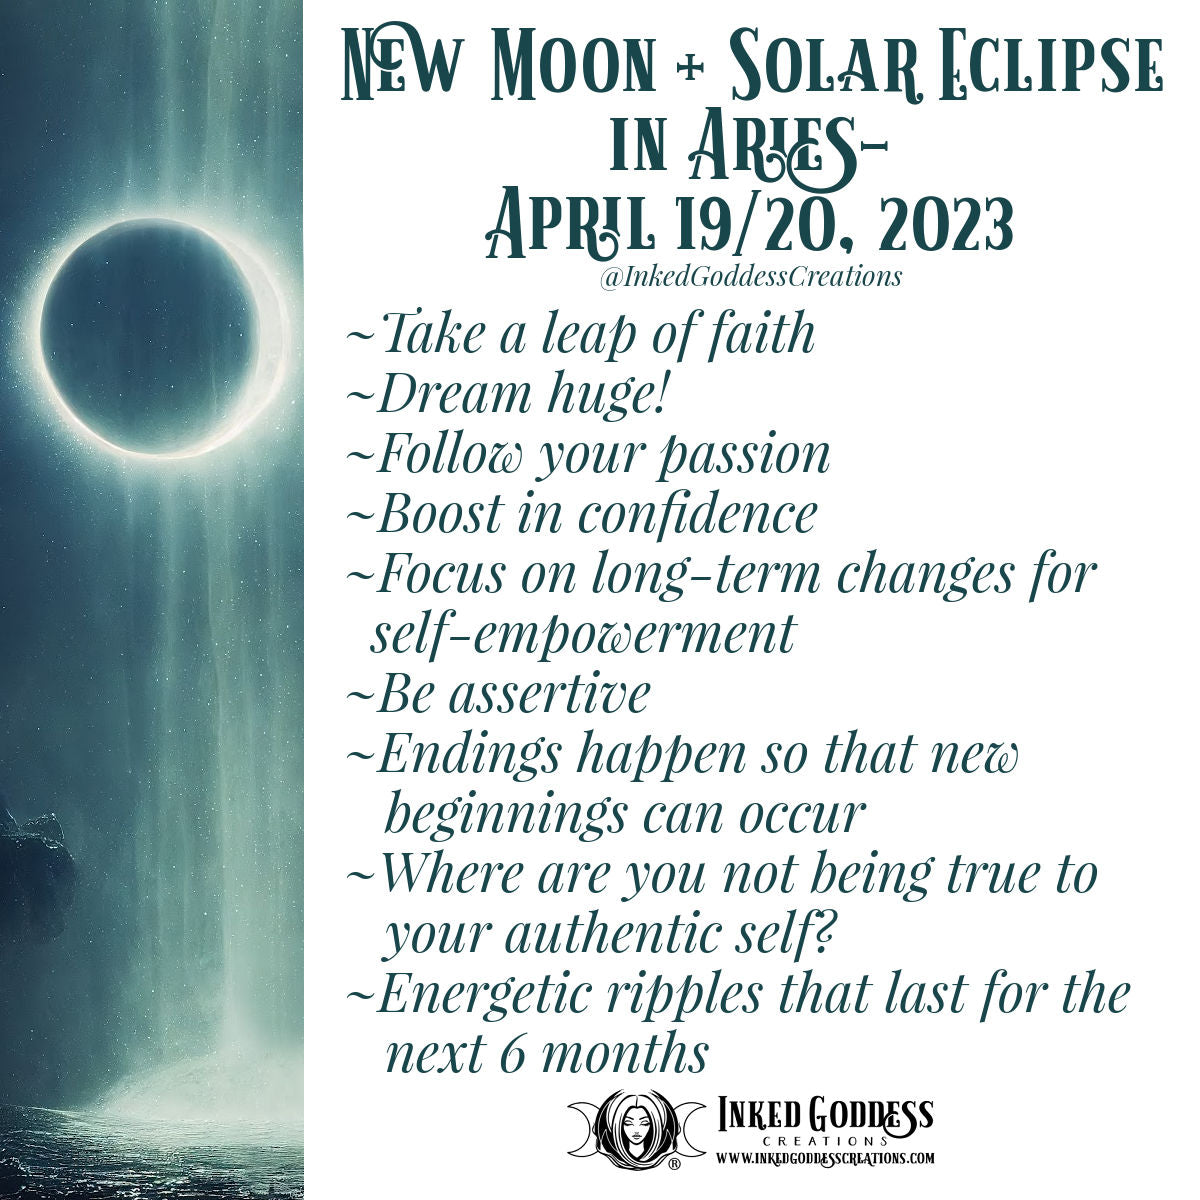 New Moon + Solar Eclipse in Aries April 19/20, 2023